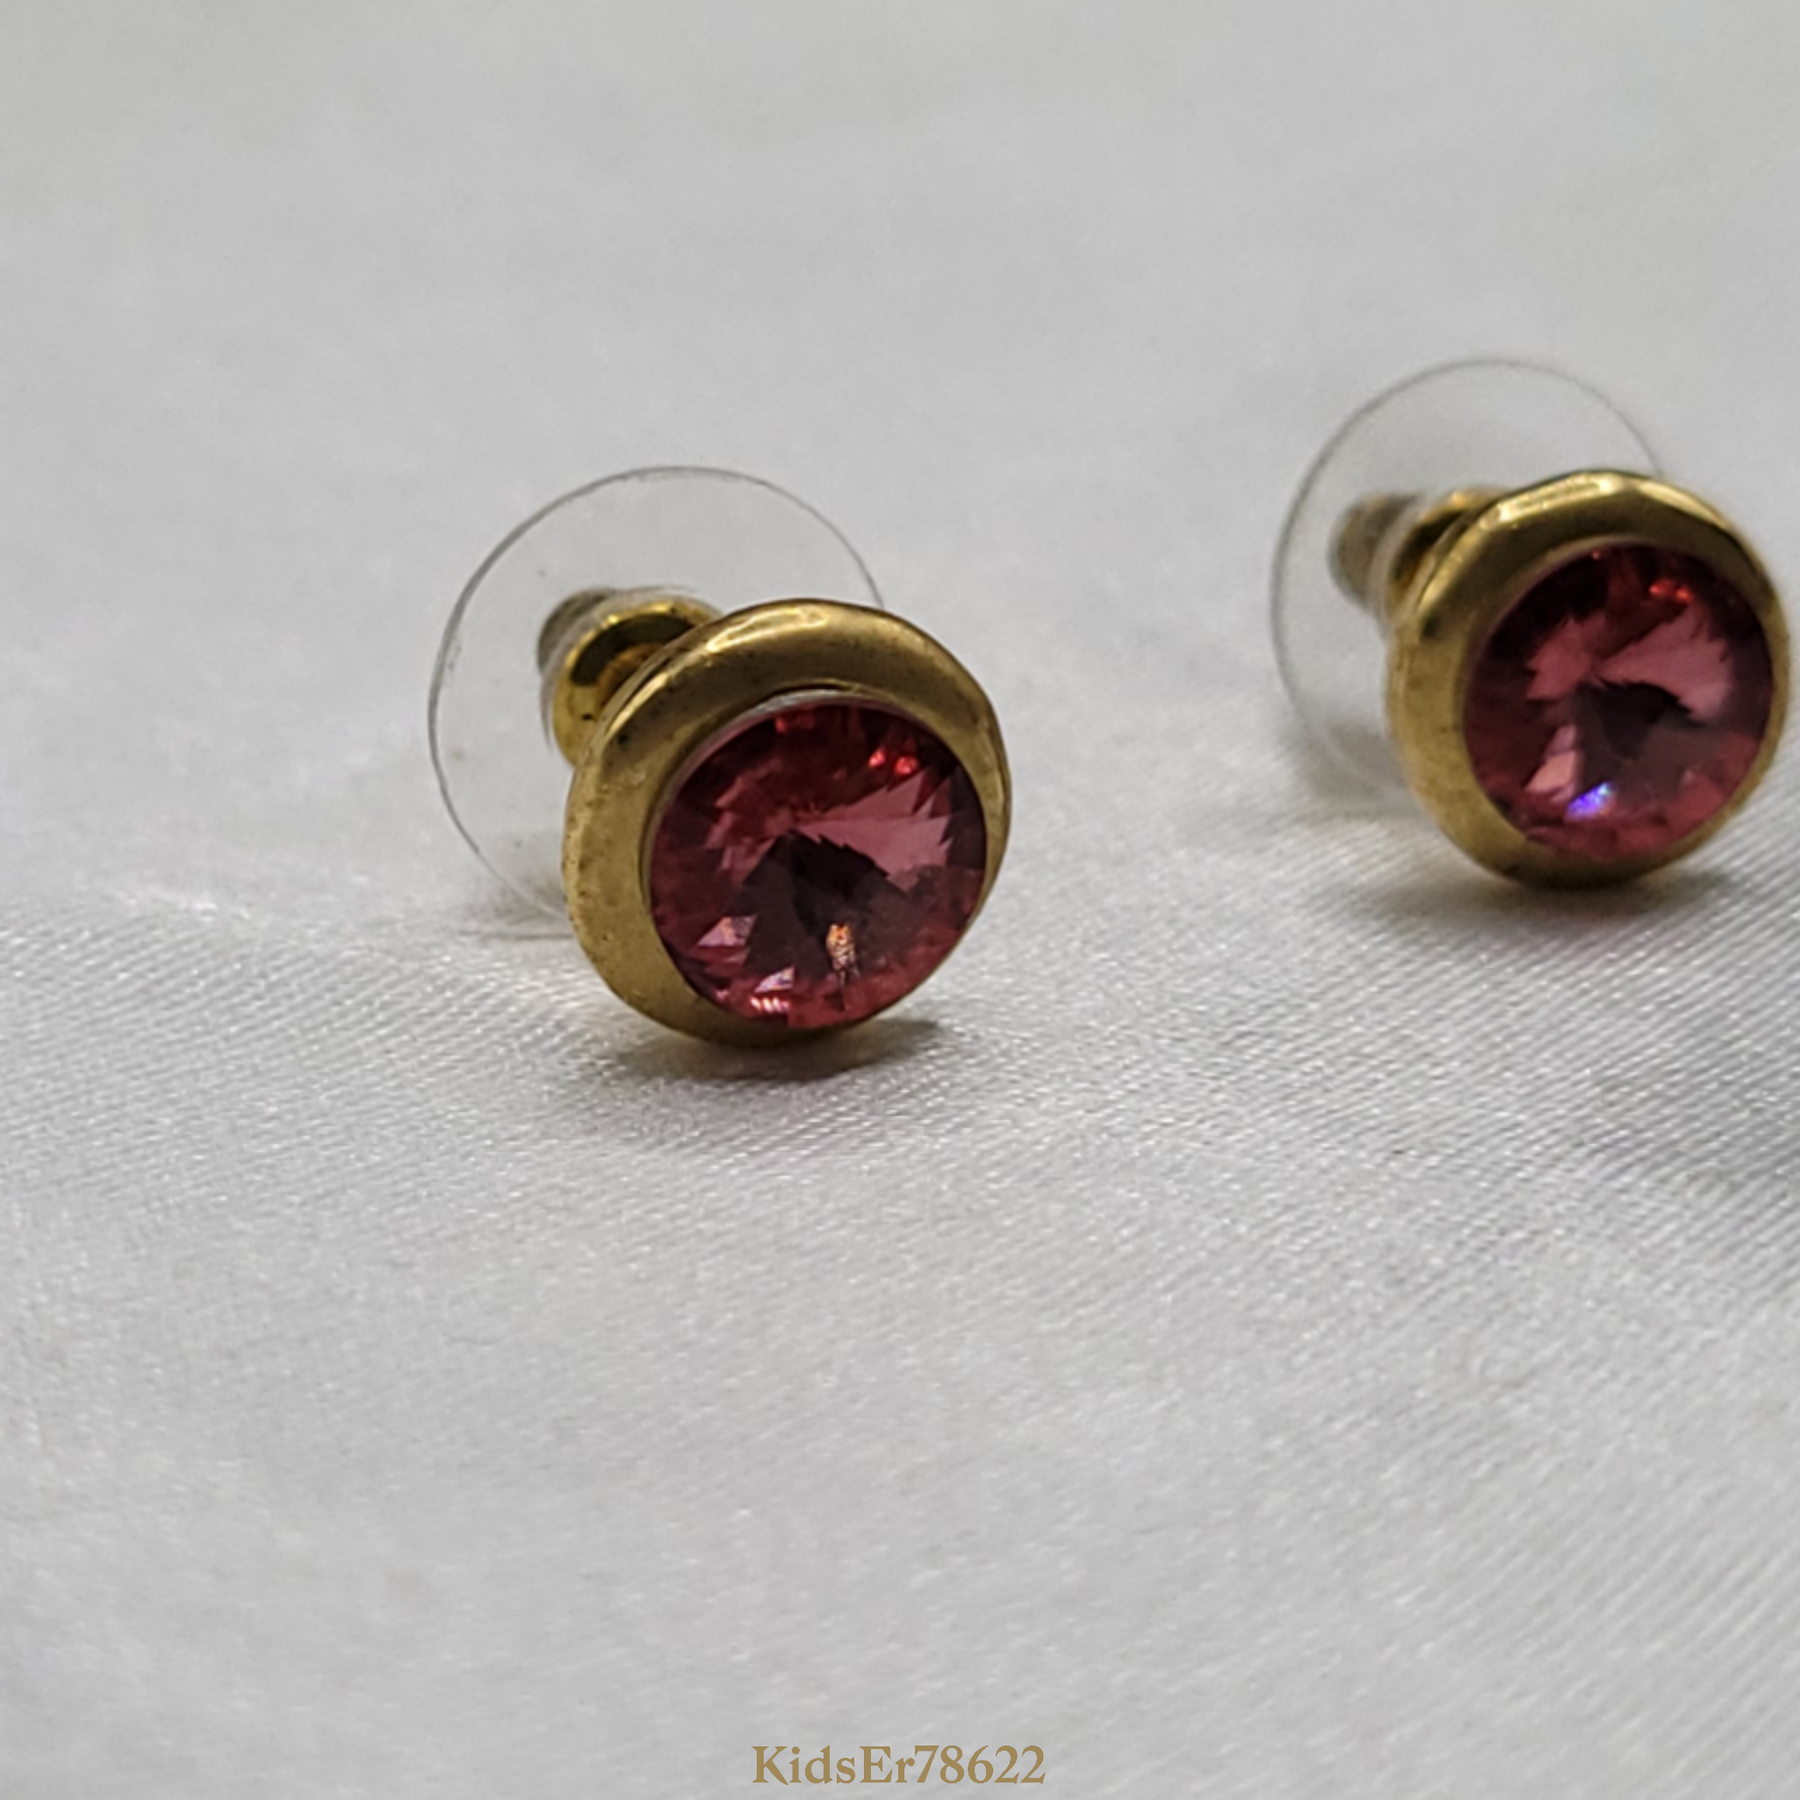 SPARKLY PINK EARRINGS WITH GOLD METAL DETAILS